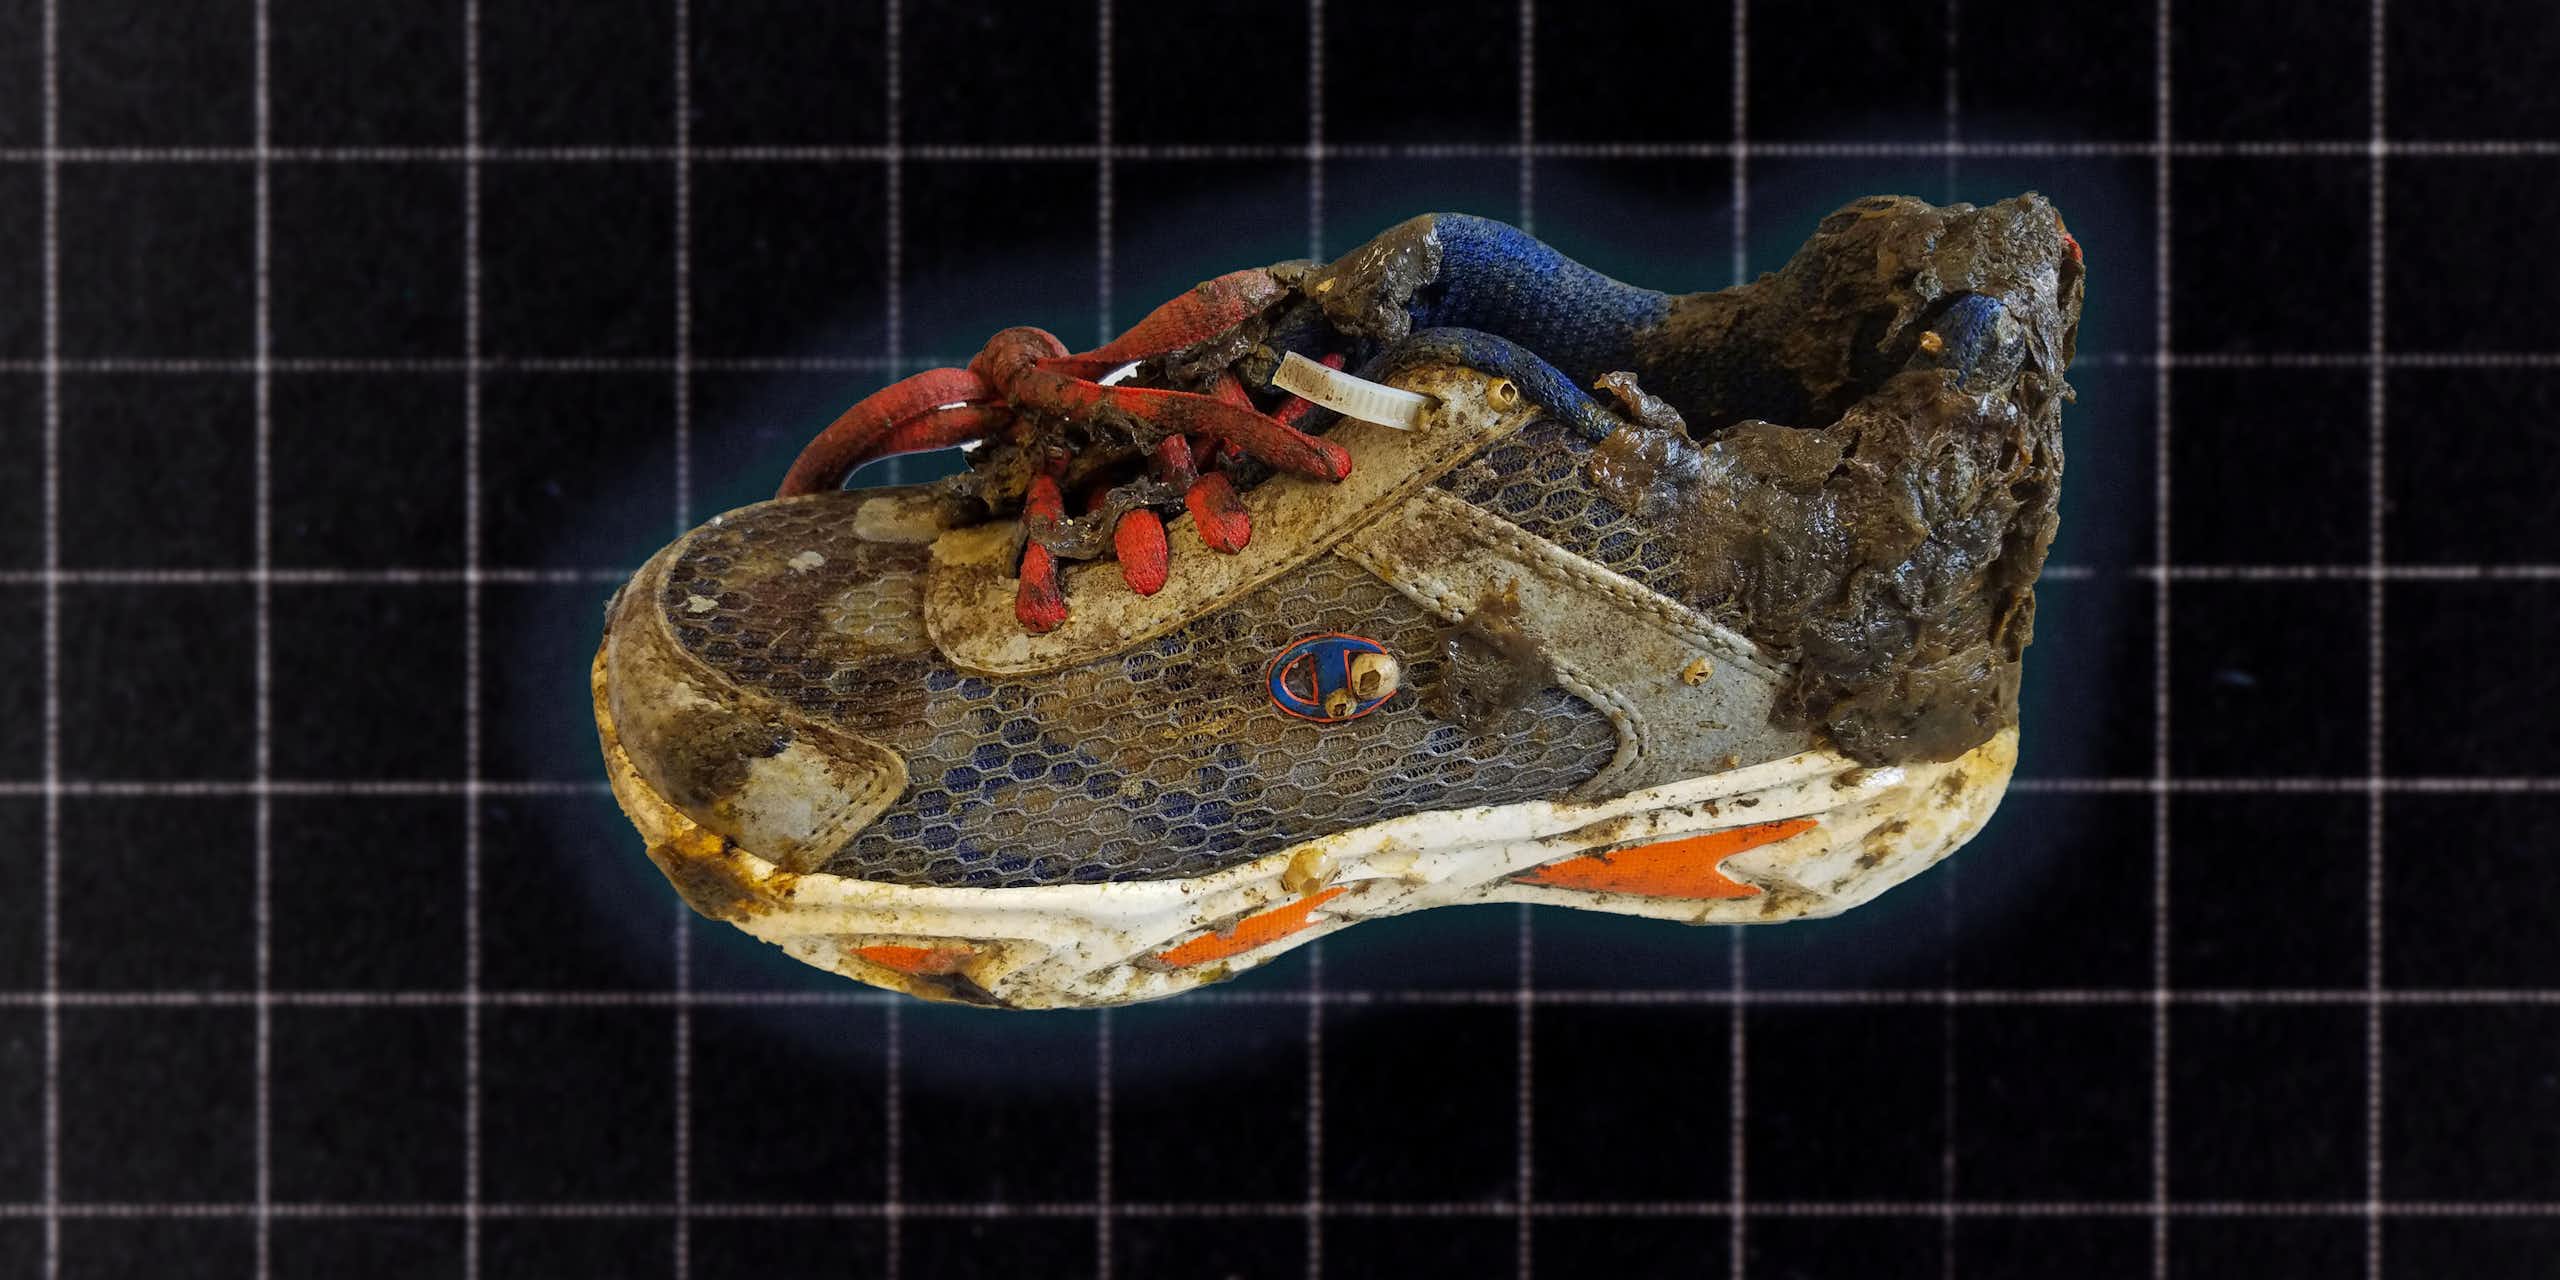 A running shoe covered in grime and barnacles displayed on a dark grid background.